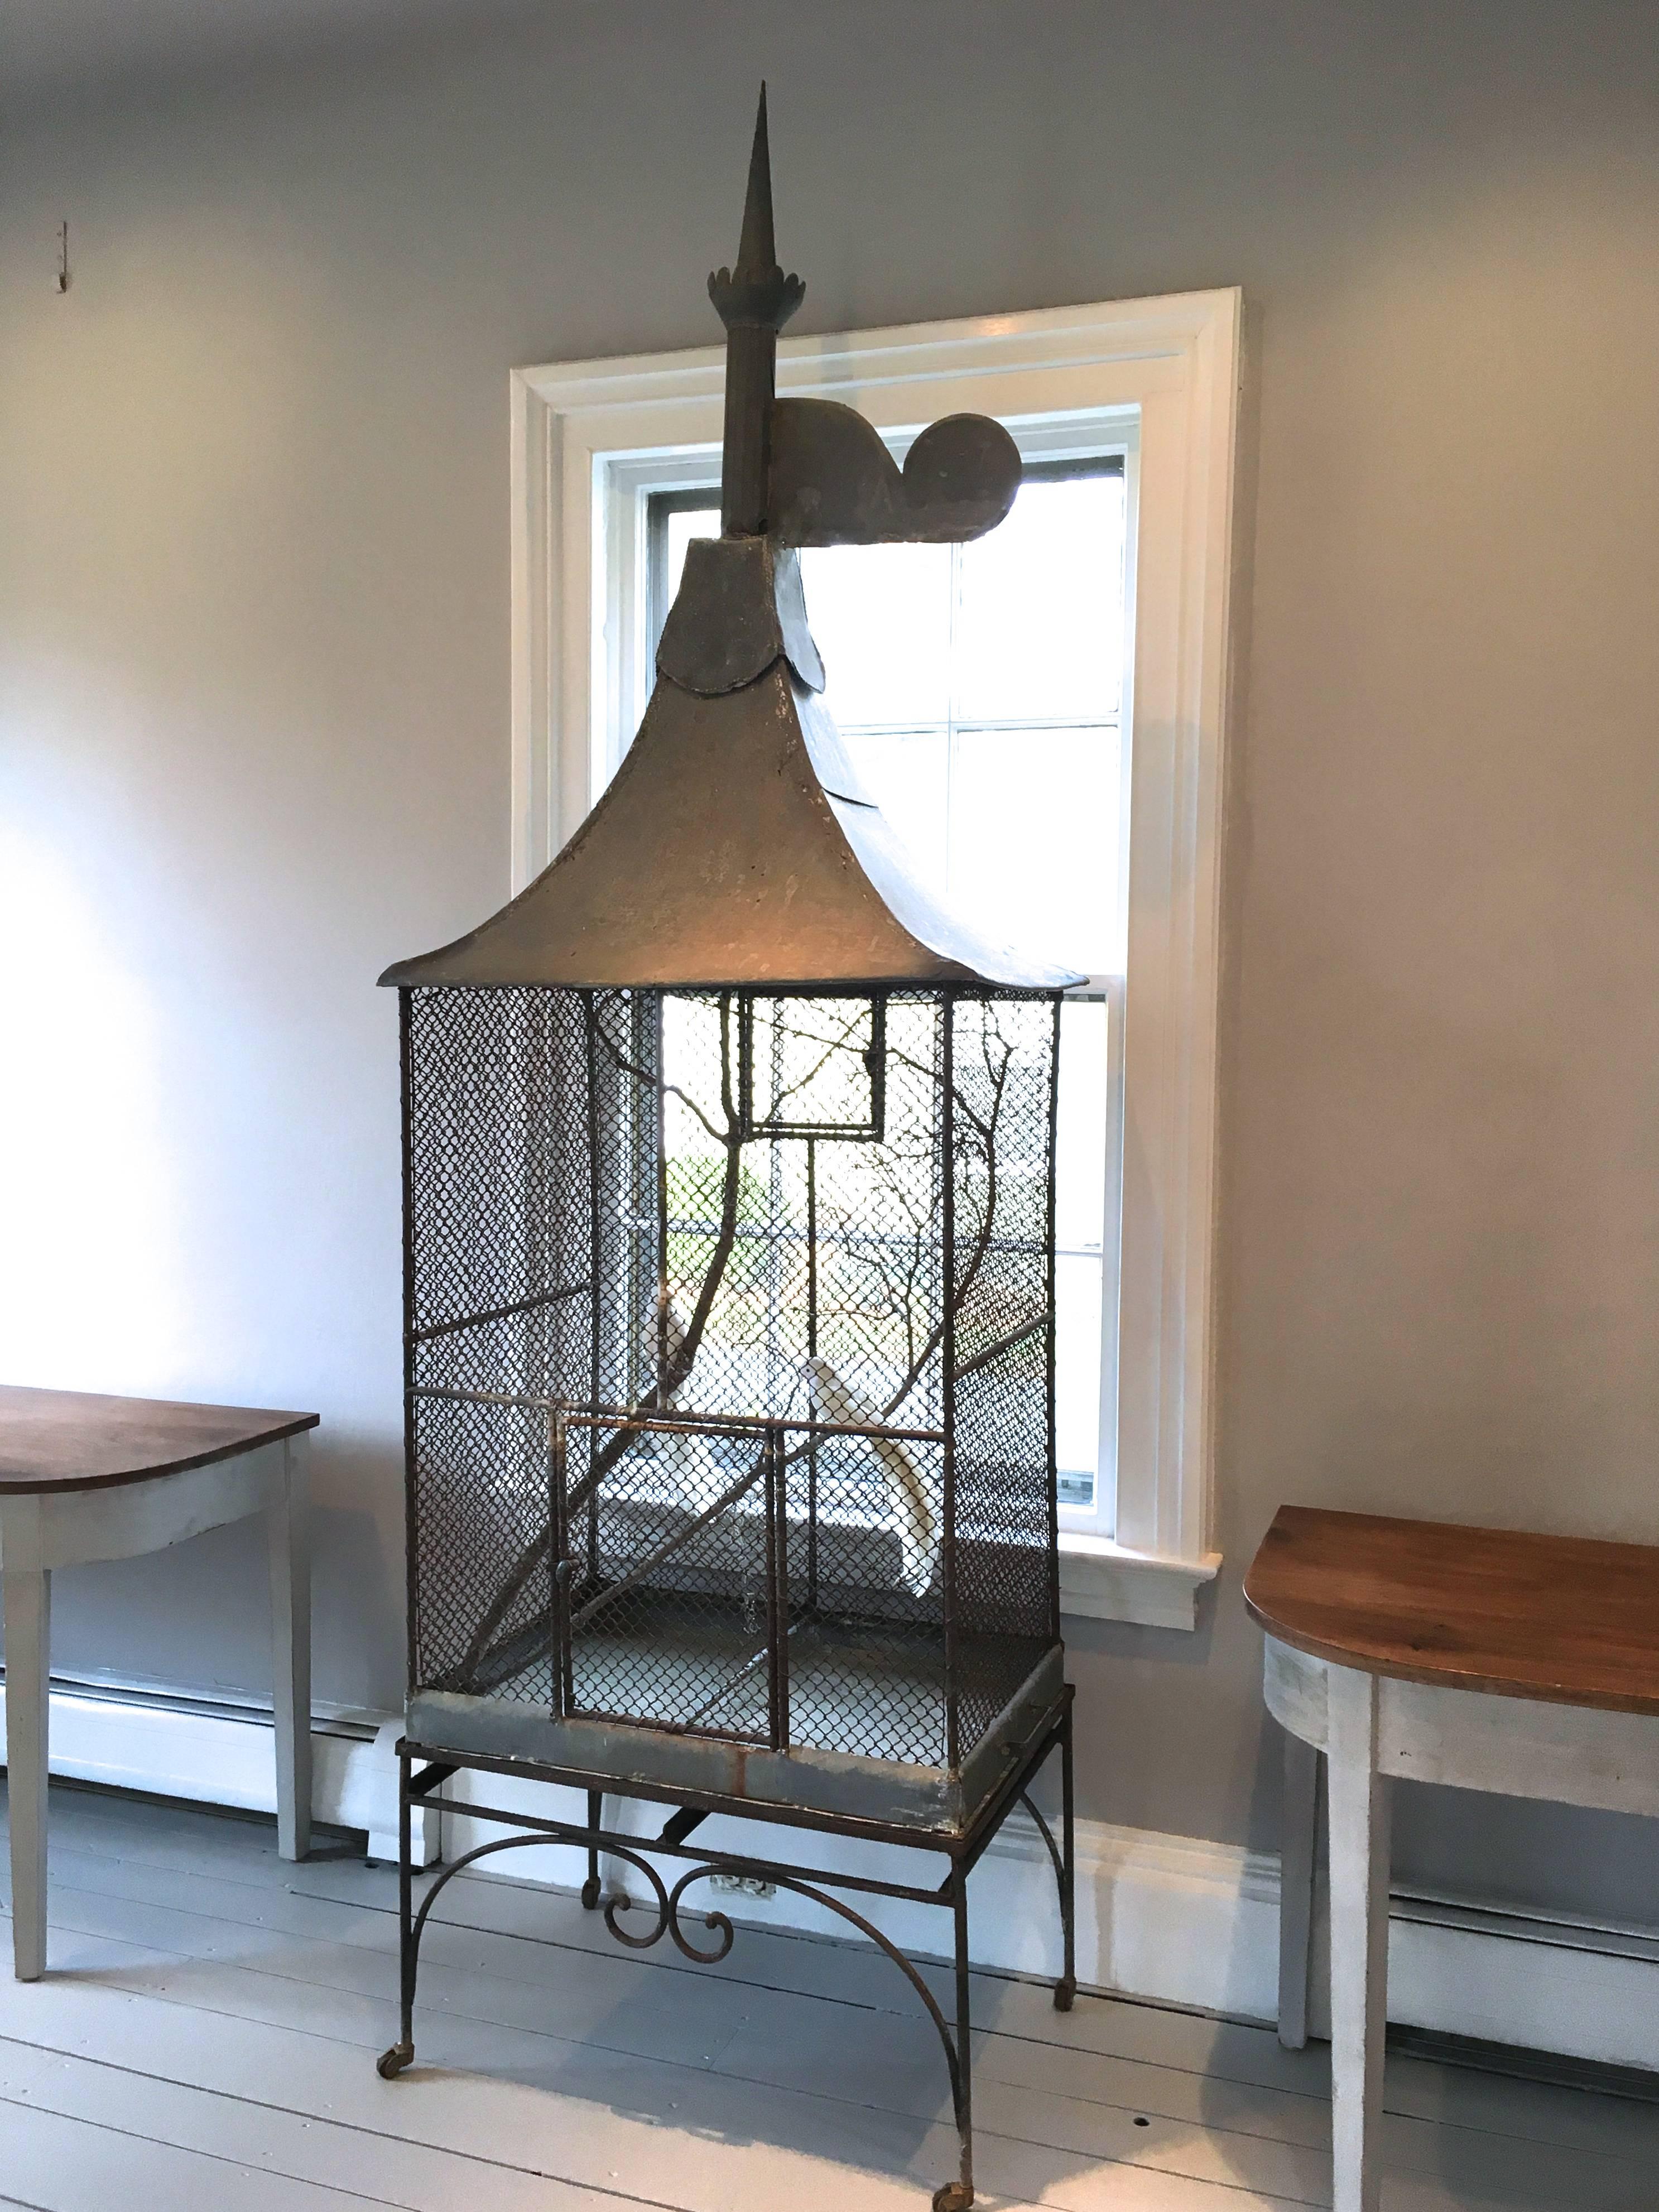 An elegant and unusual wrought iron parrot cage with zinc pagoda roof and grand finial sits snugly on it's original wrought iron stand with operational wheels. Original slide-out litter tray and two access doors make this piece perfectly functional